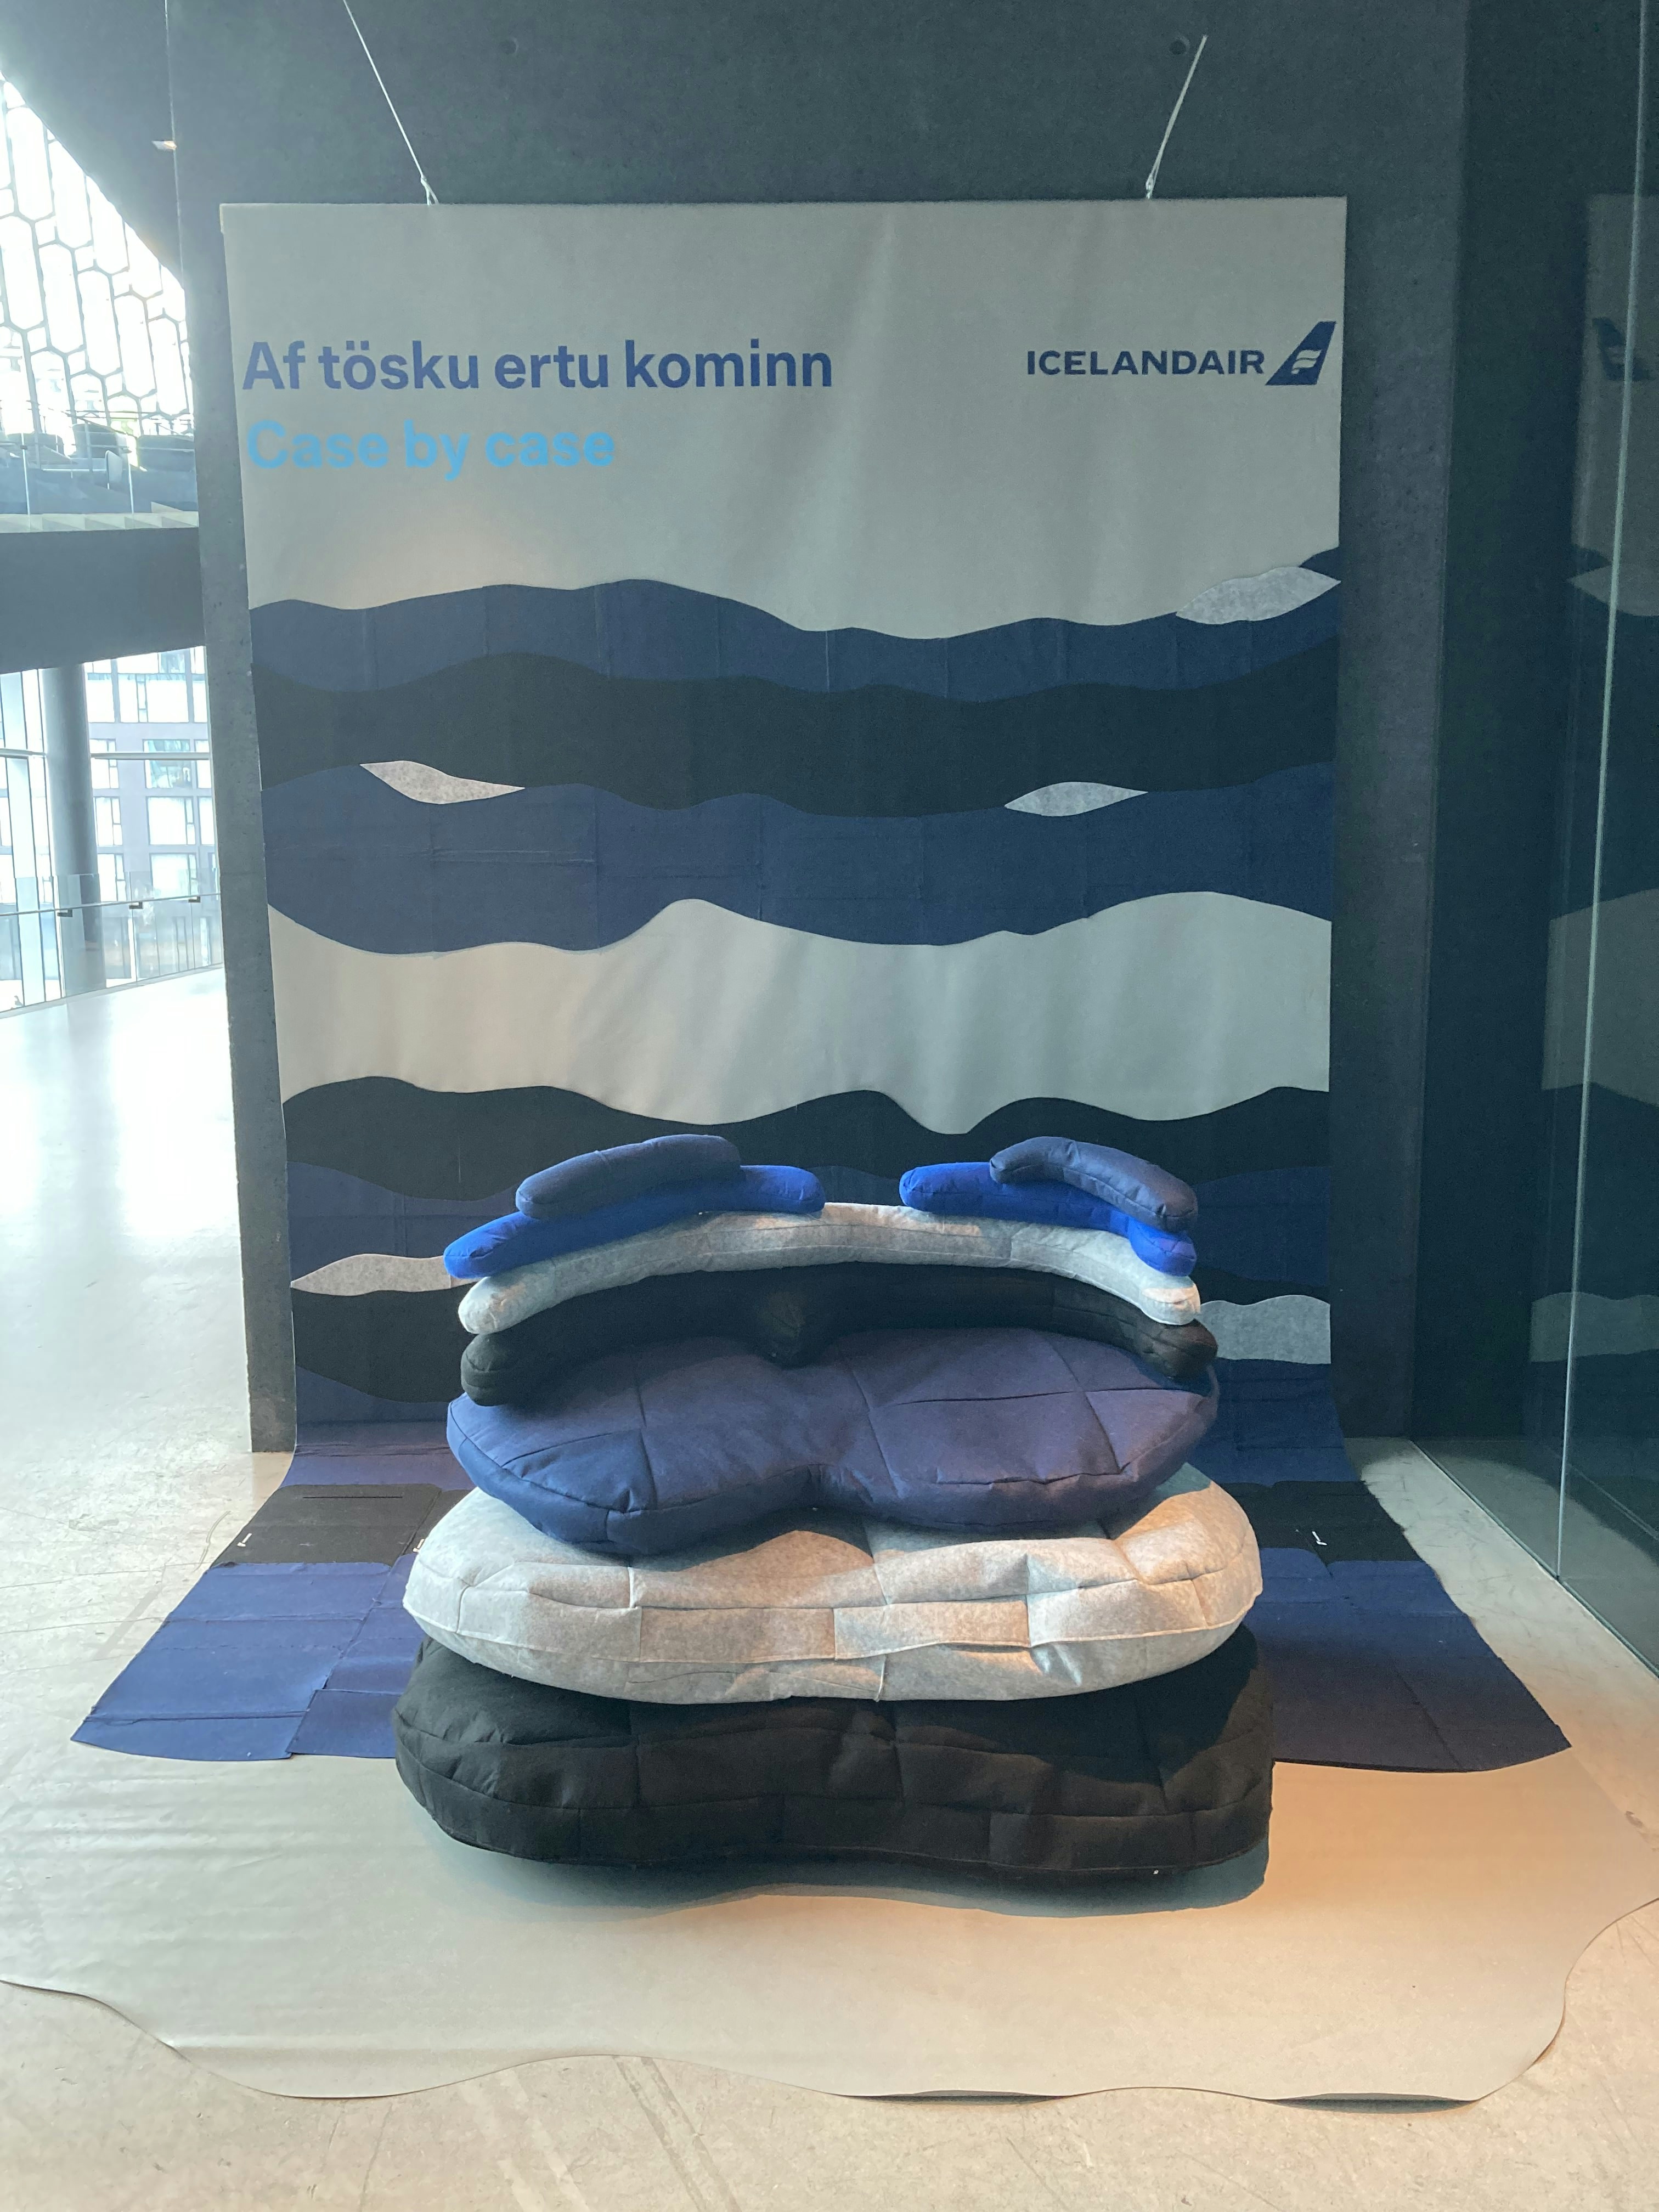 ‘Case by case’ demonstrates how recycling and sustainability have become integral parts of our existence. The collaboration between Icelandair and Rebekka Ashley posed the question of how 625 faulty laptop cases can become a sofa.